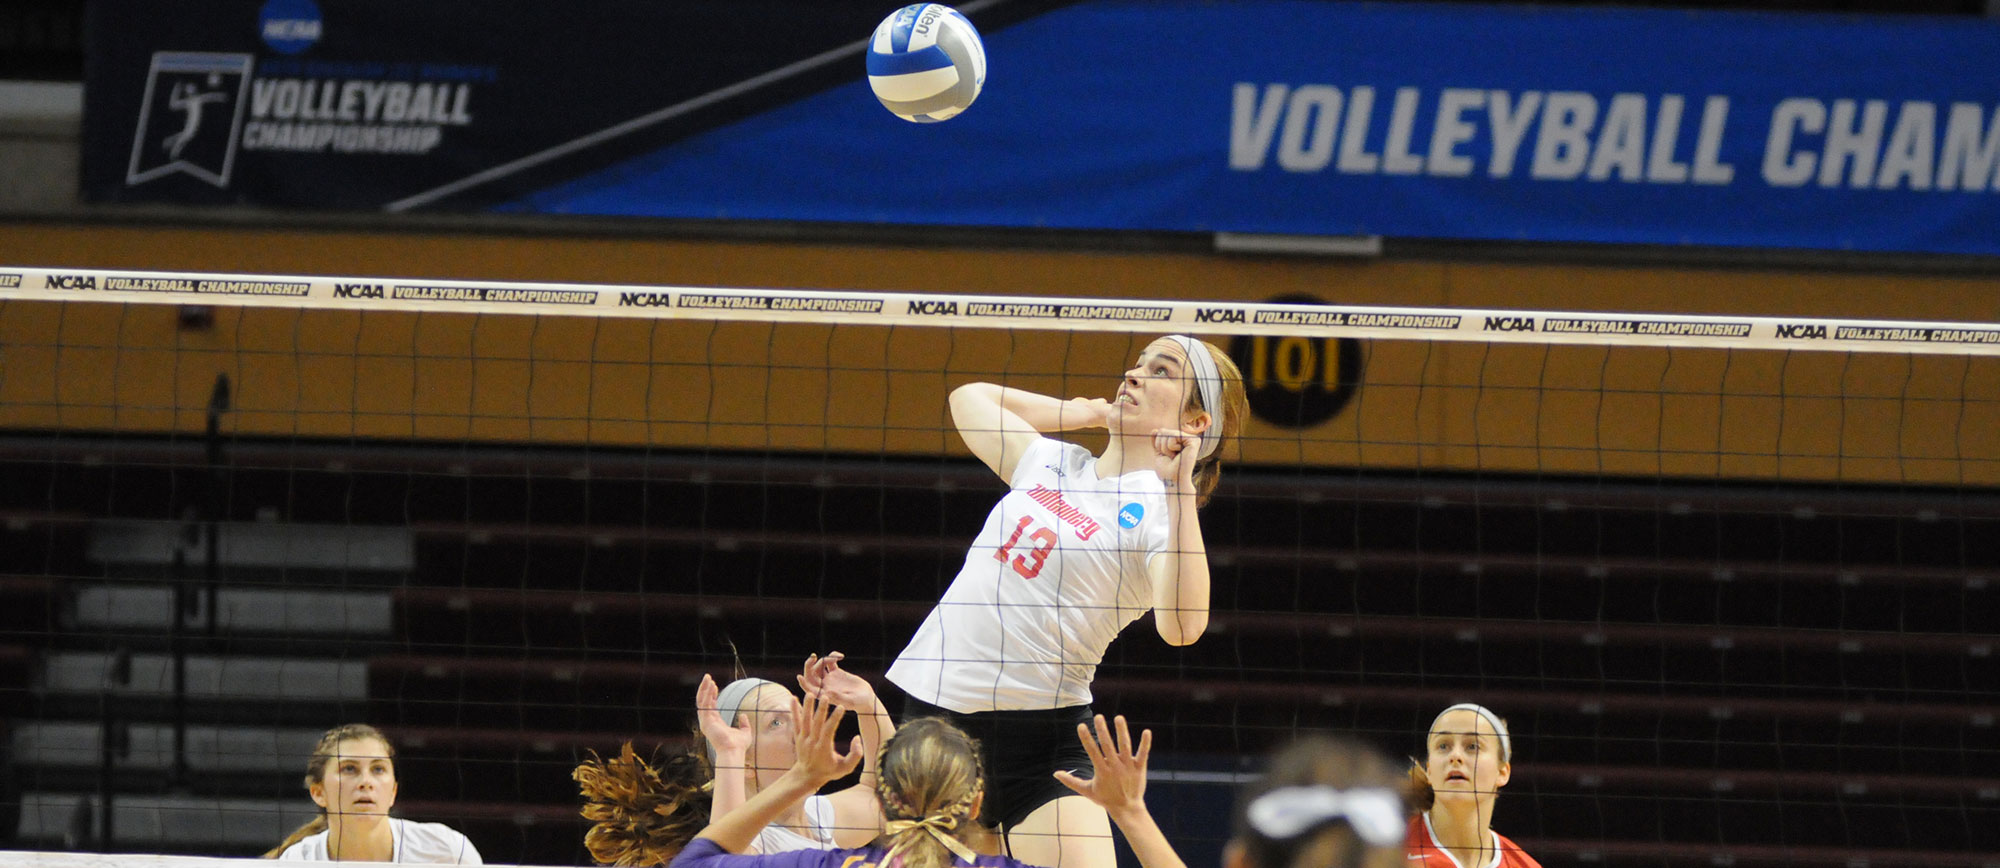 Emily Kahlig and the Tigers came up on the short end in the 2015 NCAA Championship match. Photo by Tom Renner